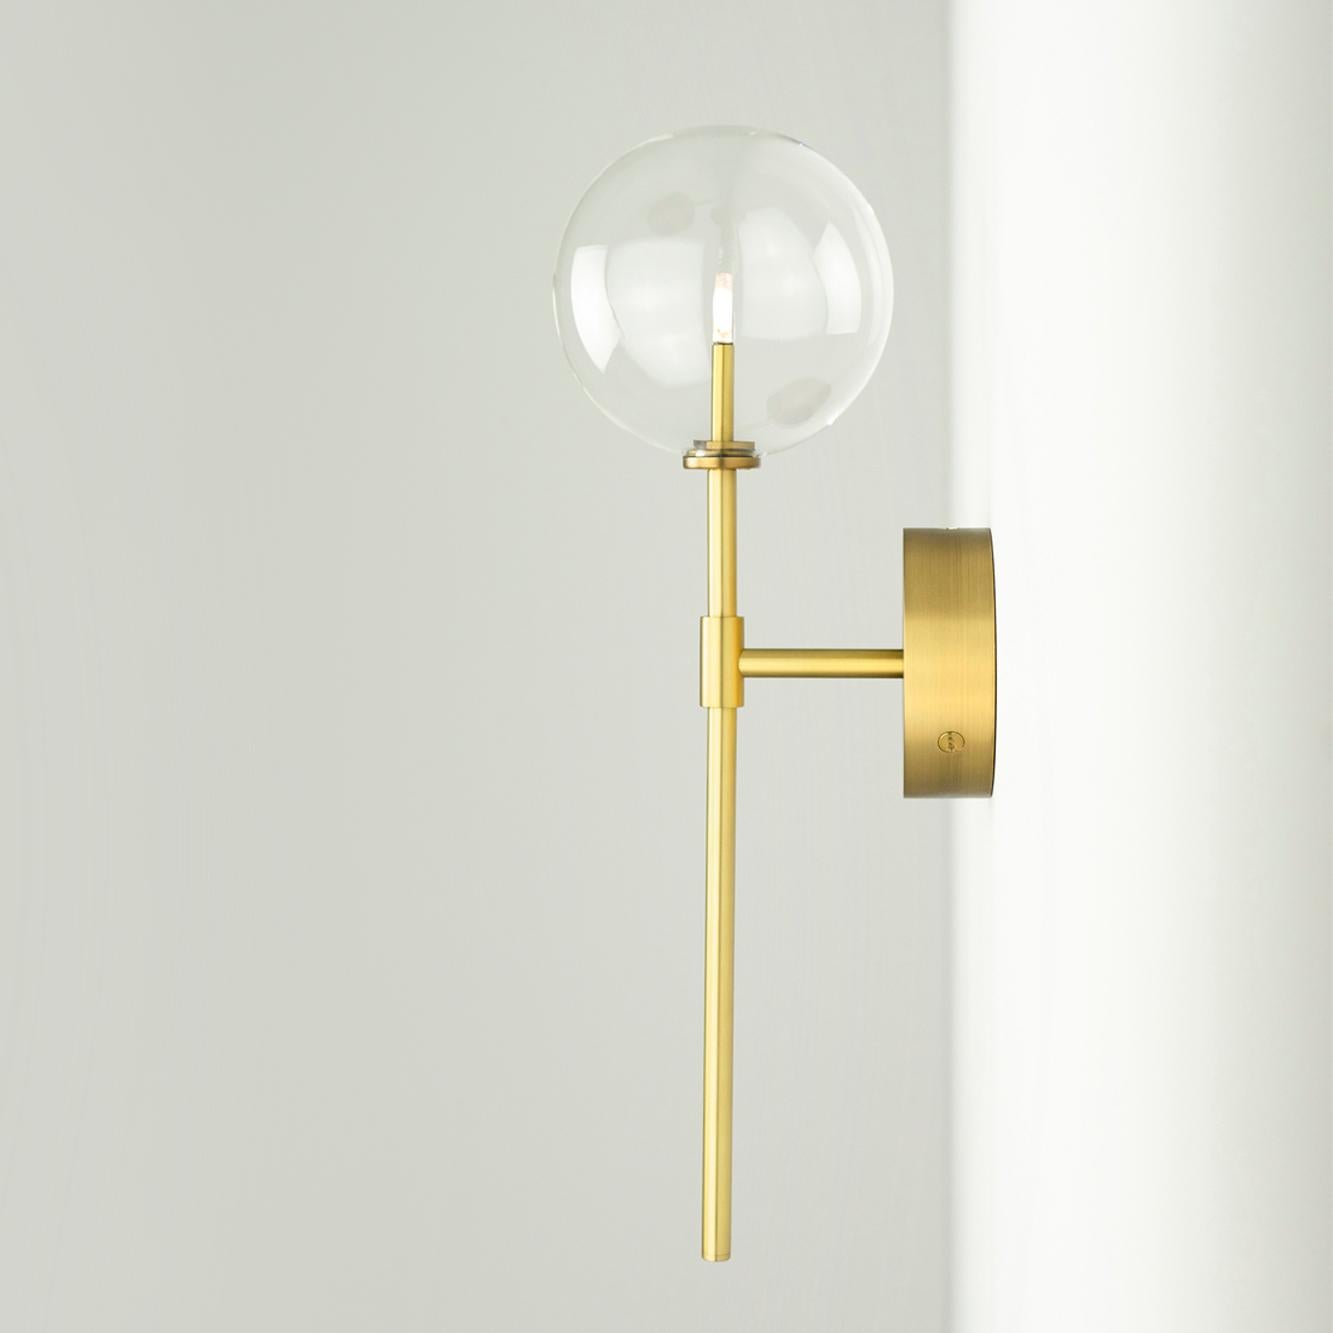 Dawn Single Brass Wall Sconce by Schwung 
Dimensions: W 19 x D 15 x H 50.4 cm
Materials: Natural brass, hand blown glass globes

Finishes available: Black gunmetal, polished nickel
Other sizes available

Schwung is a German word, and loosely